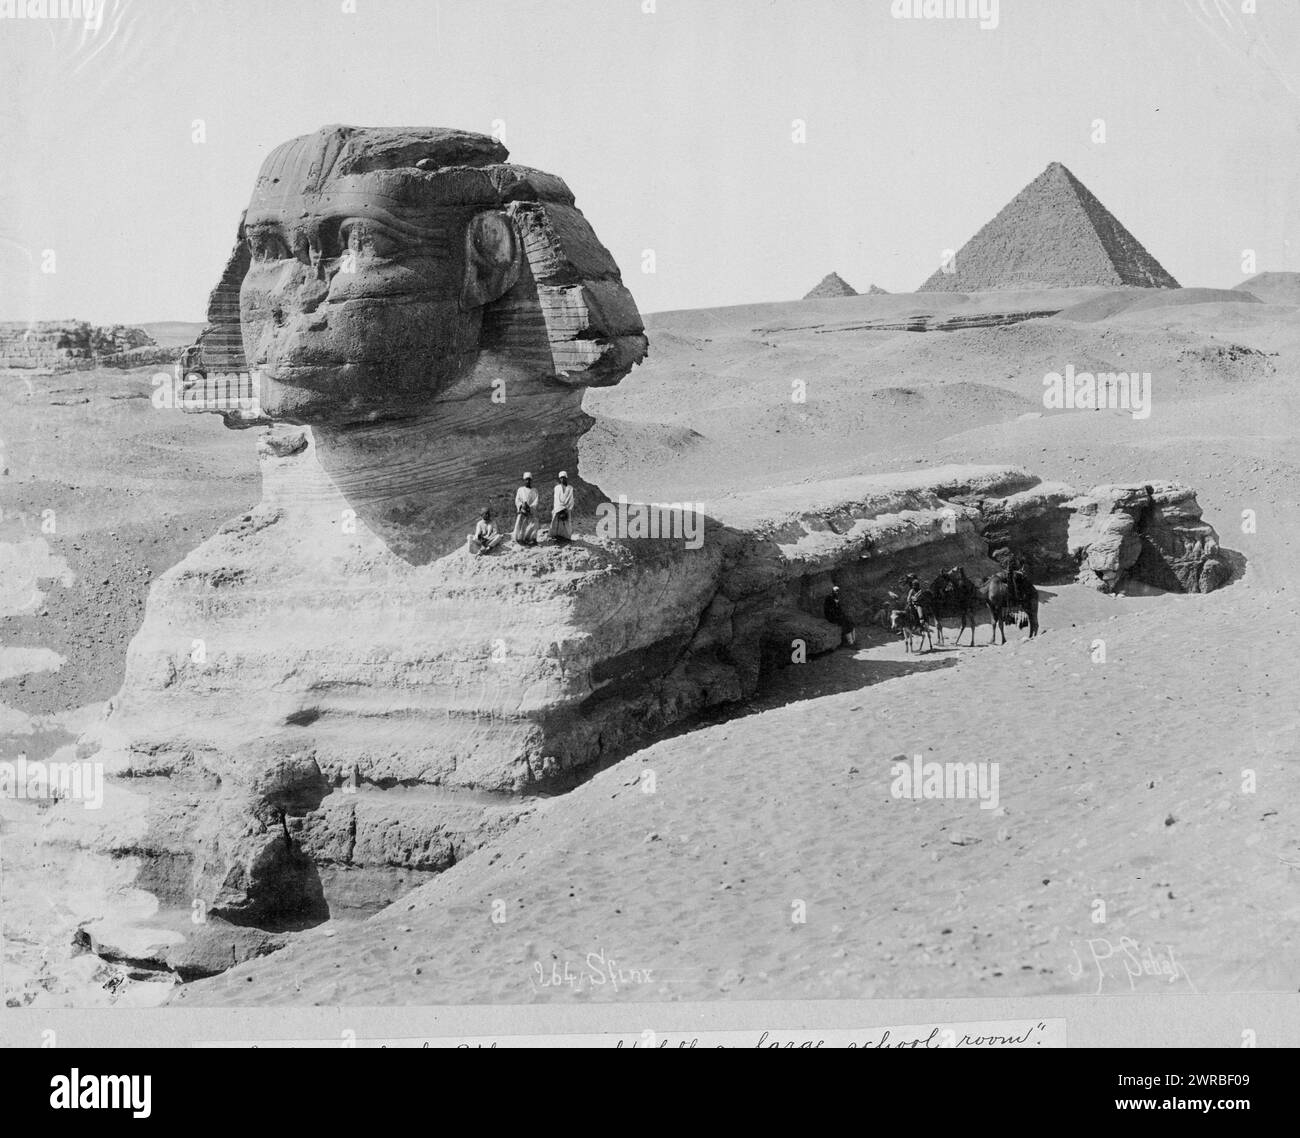 The Sphinx, Egypt, Carpenter, Frank G. (Frank George), 1855-1924, collector, between 1890 and 1923, Sphinxes, Egypt, 1890-1930, Photographic prints, 1890-1930., Photographic prints, 1890-1930, 1 photographic print Stock Photo